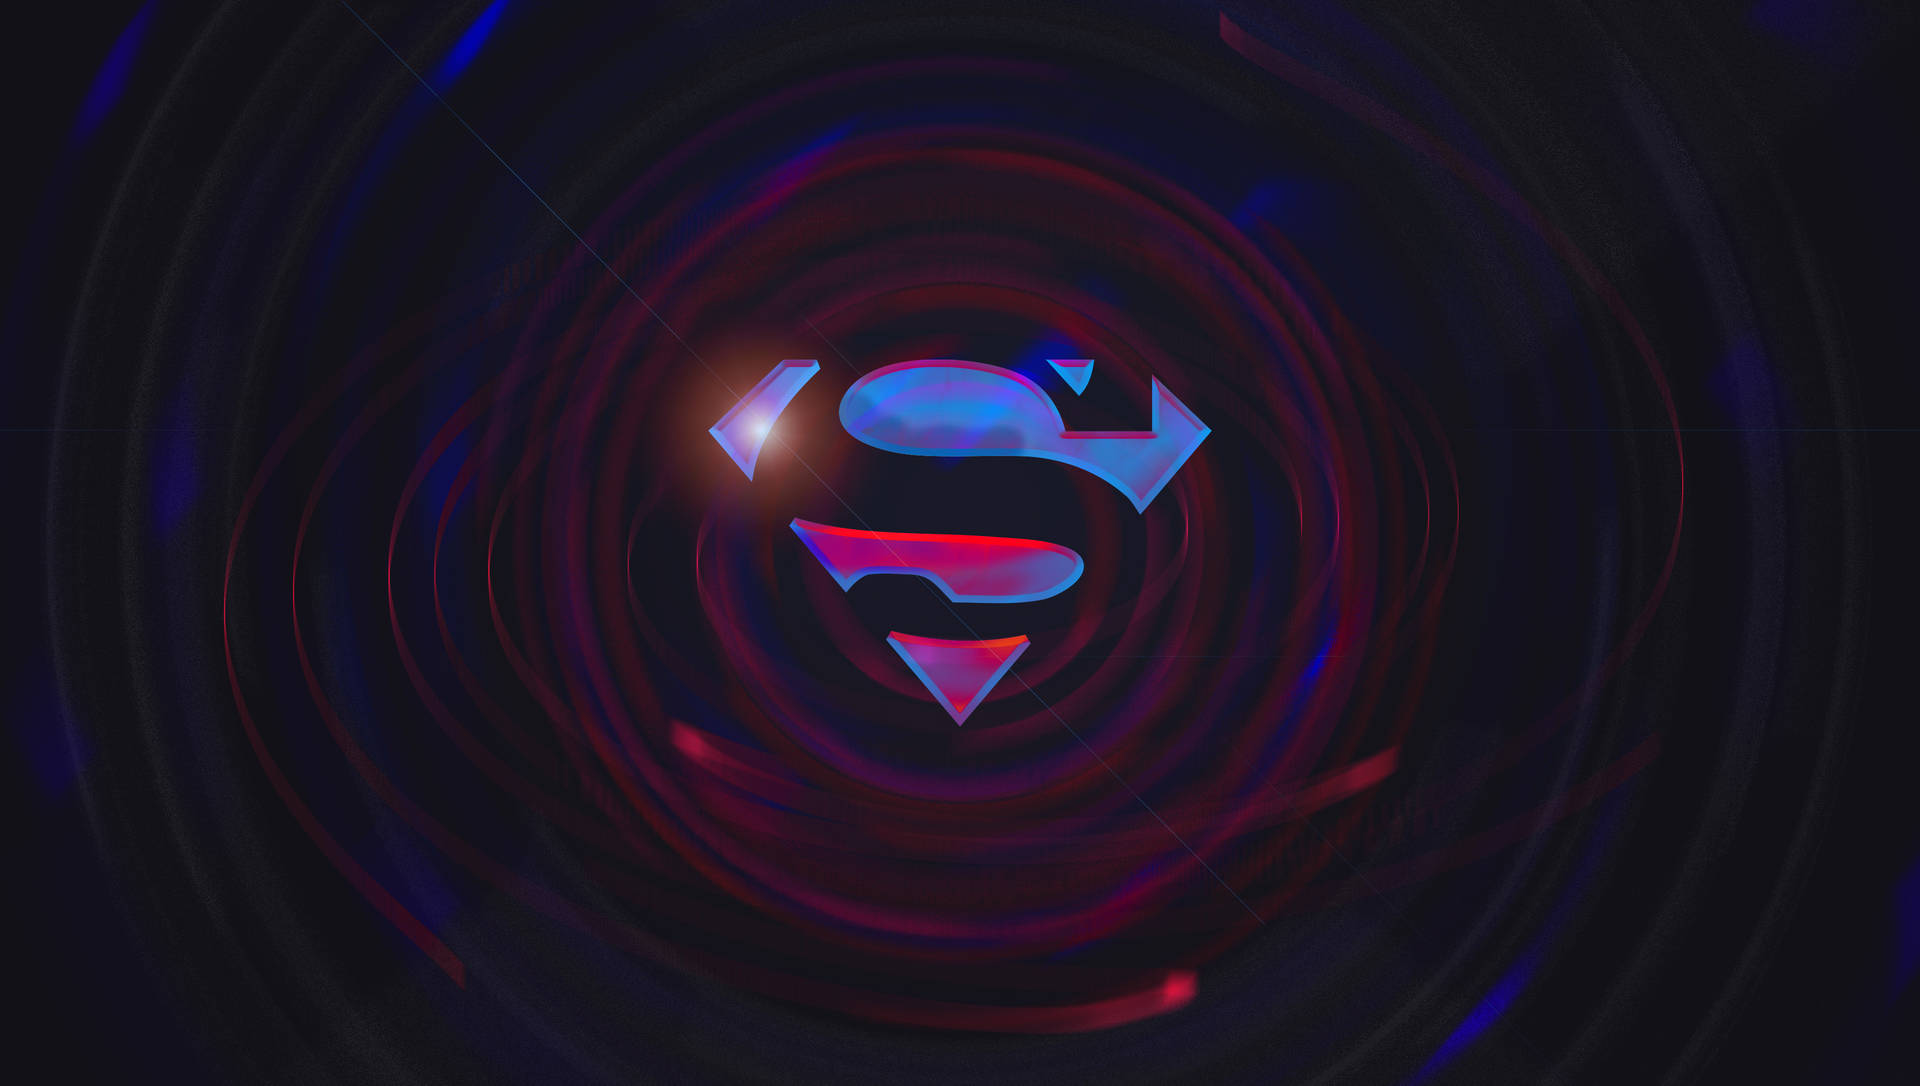 Cool Tunnel Superman Symbol Iphone Background